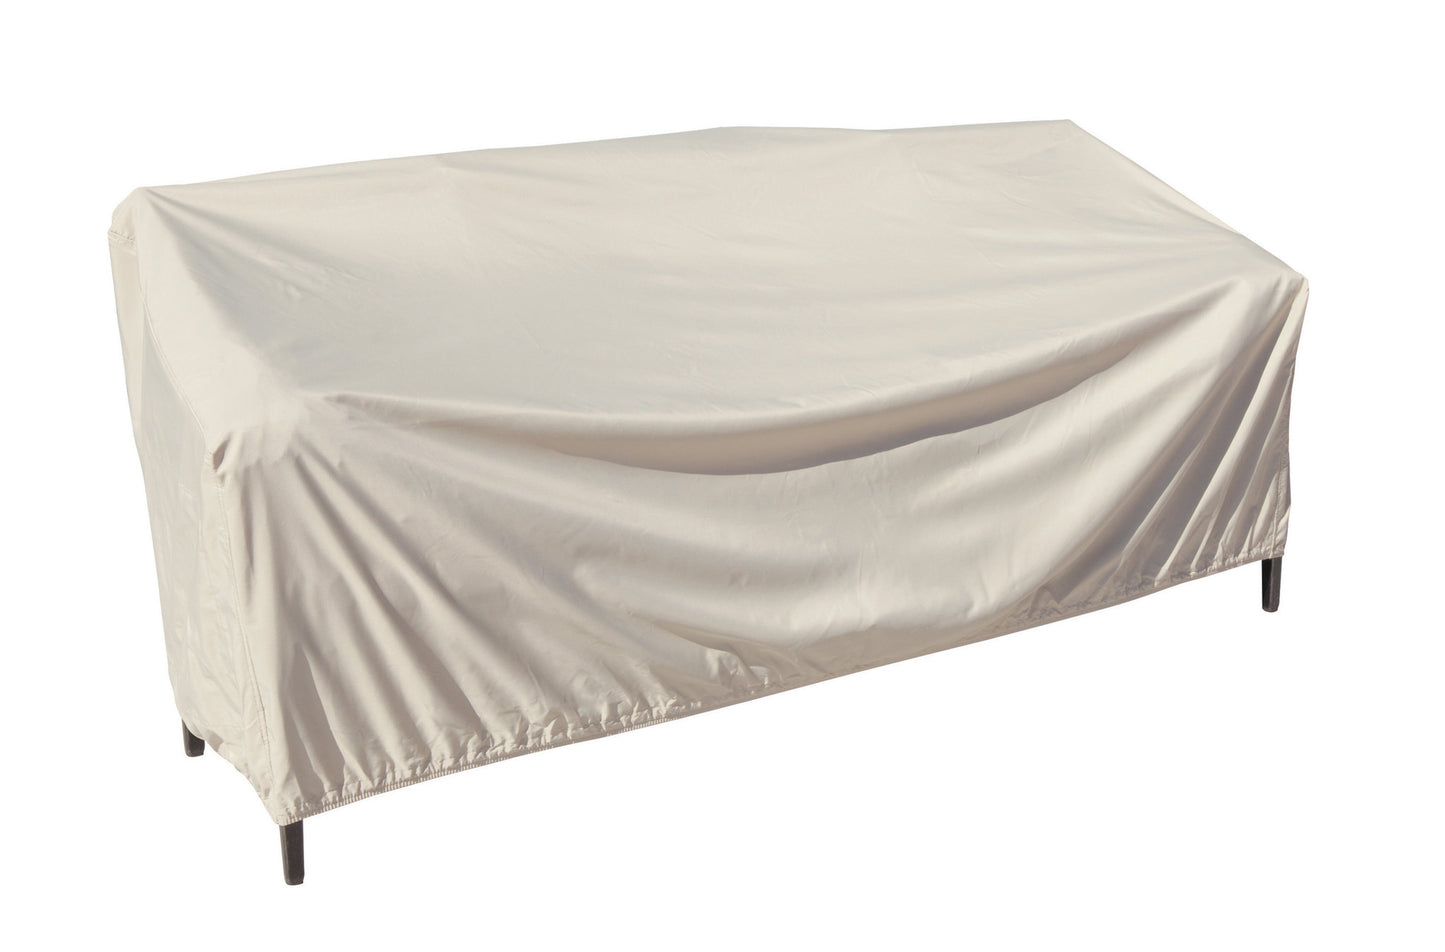 Treasure Garden Sofa Cover (Extra Large Size) | Barbecues Galore Burlington, Oakville, Toronto and Calgary, Alberta, Stop by for your patio, cover, bbq and accessory needs.